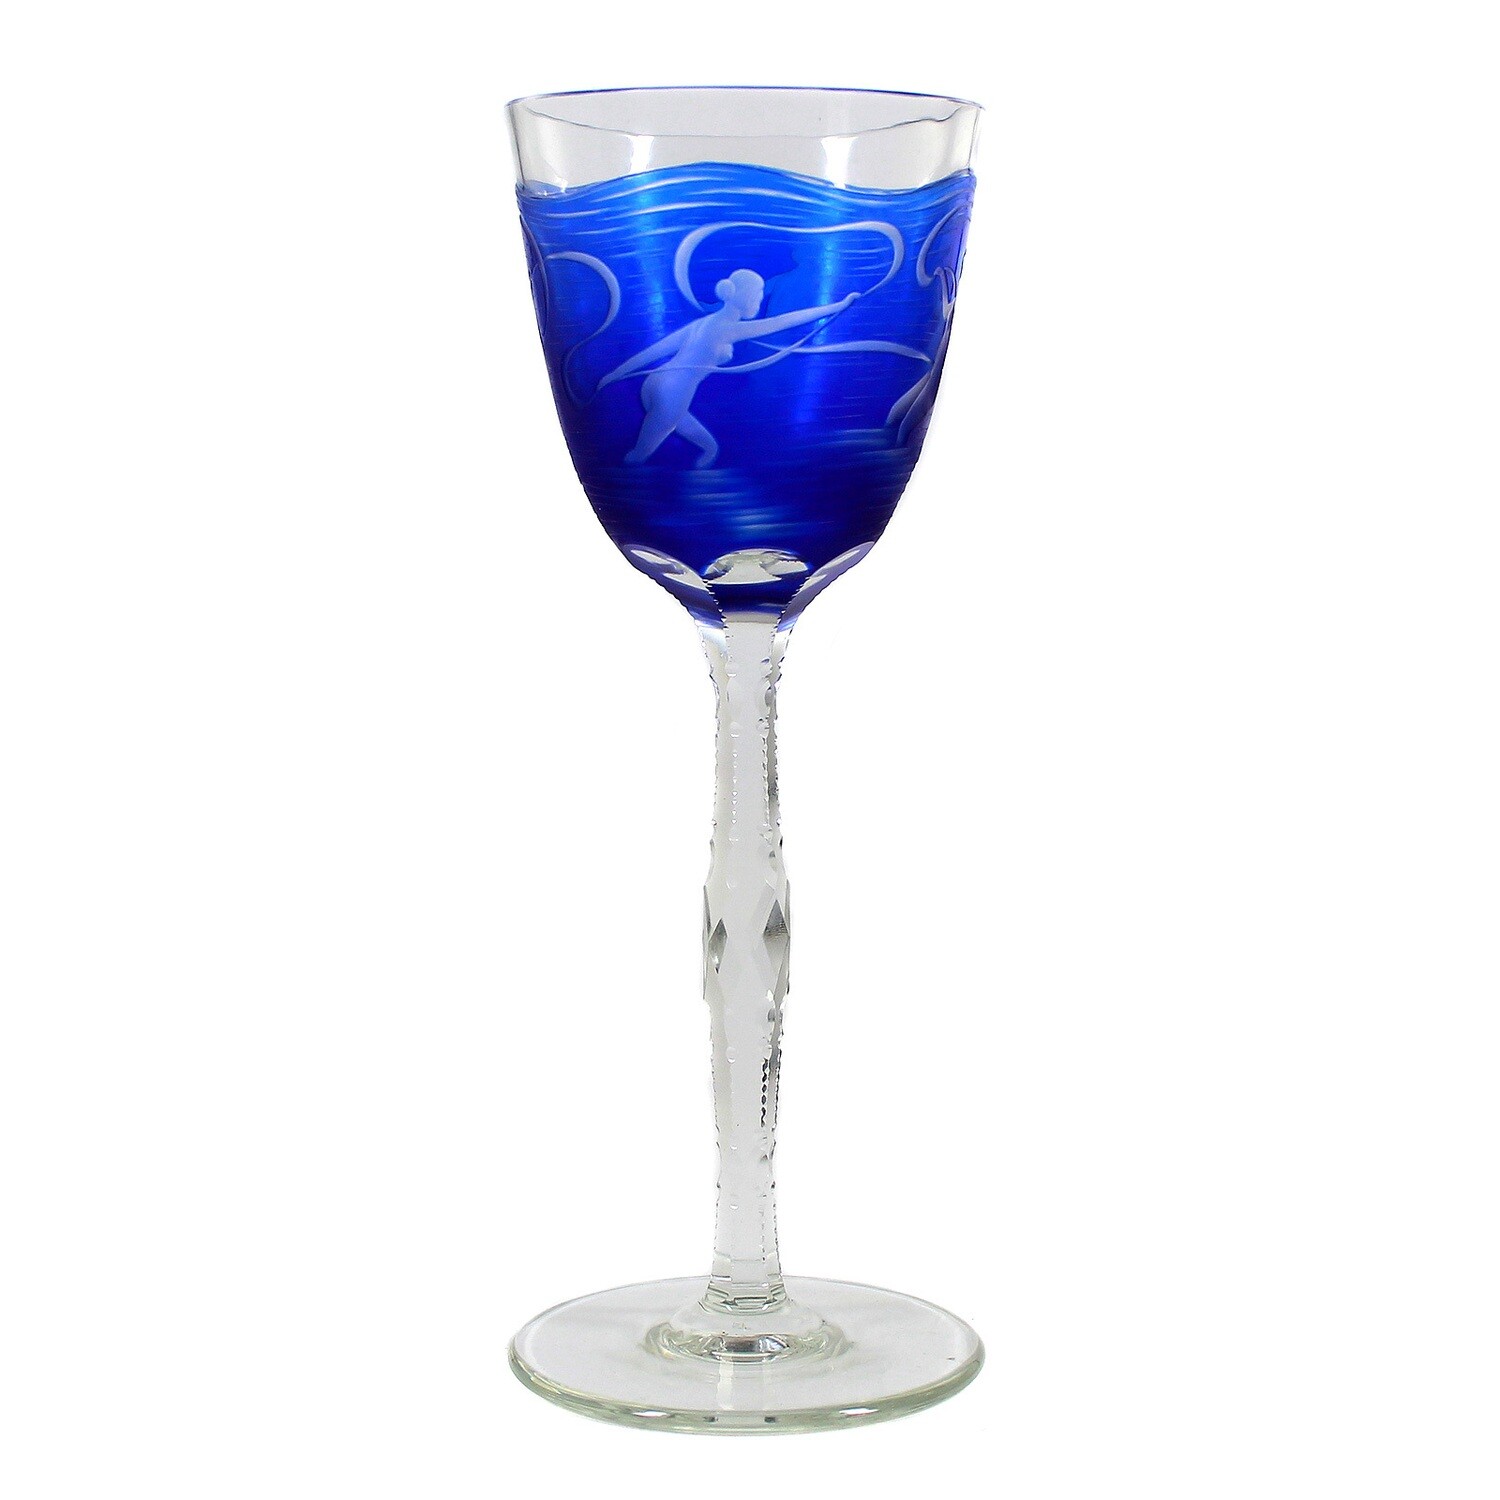 Stem glass with blue overlay from the set of four elements, Neuwelt around 1926